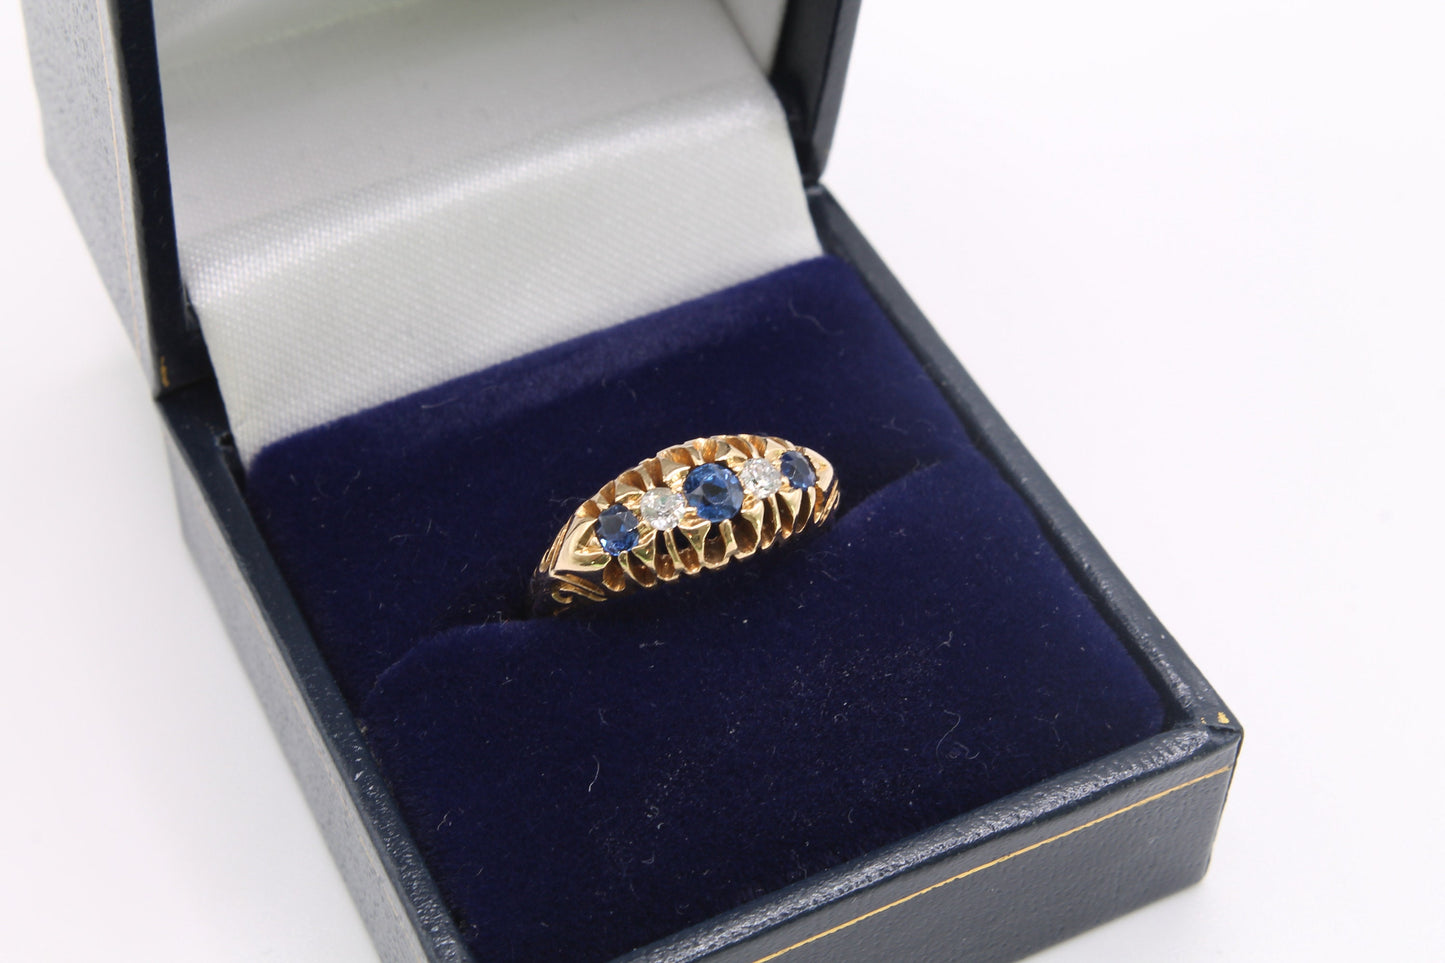 Antique-Edwardian-Diamond-and-Sapphire-18ct-Gold-Ring---1903